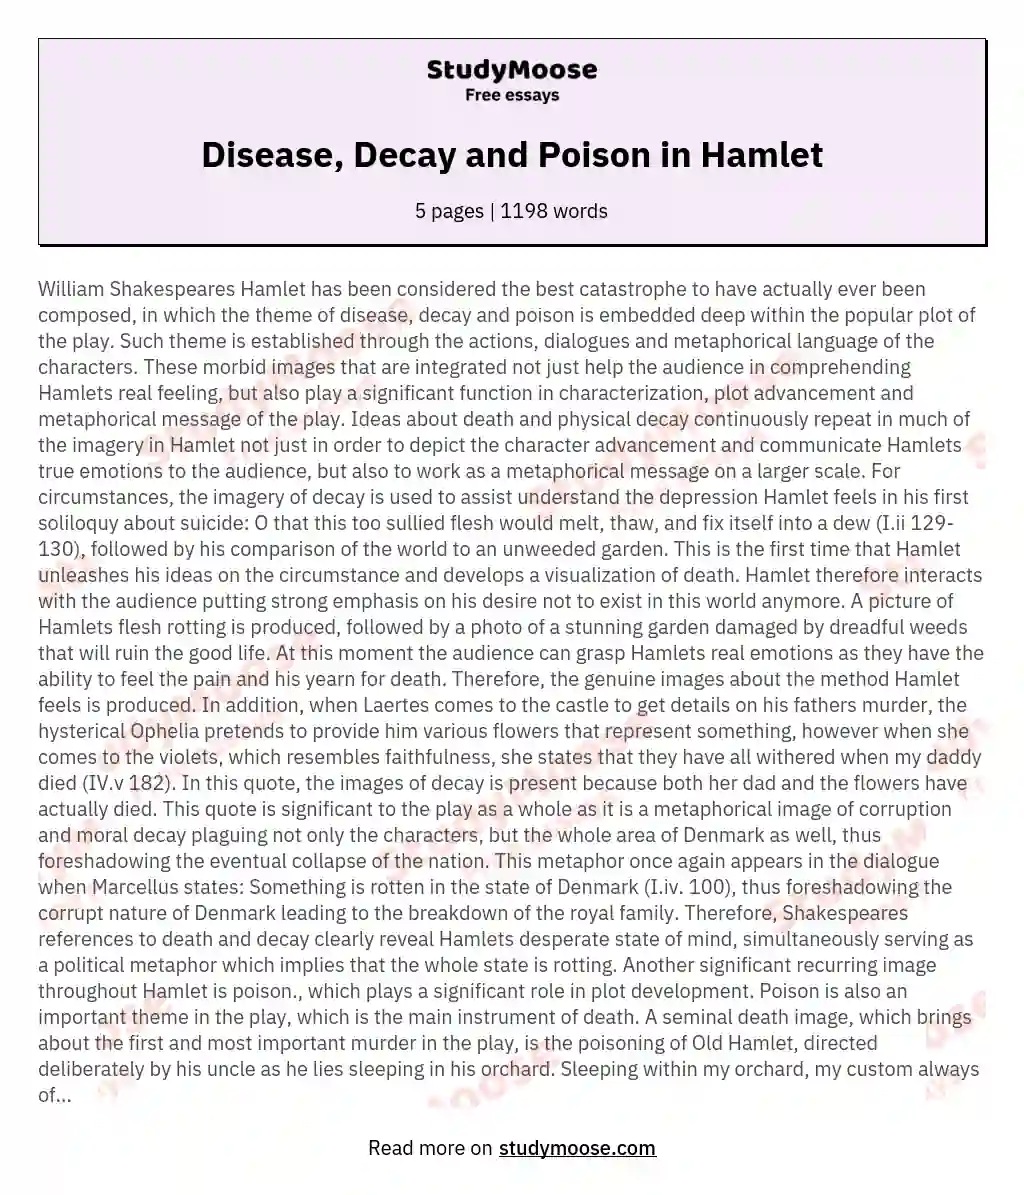 Disease, Decay and Poison in Hamlet essay